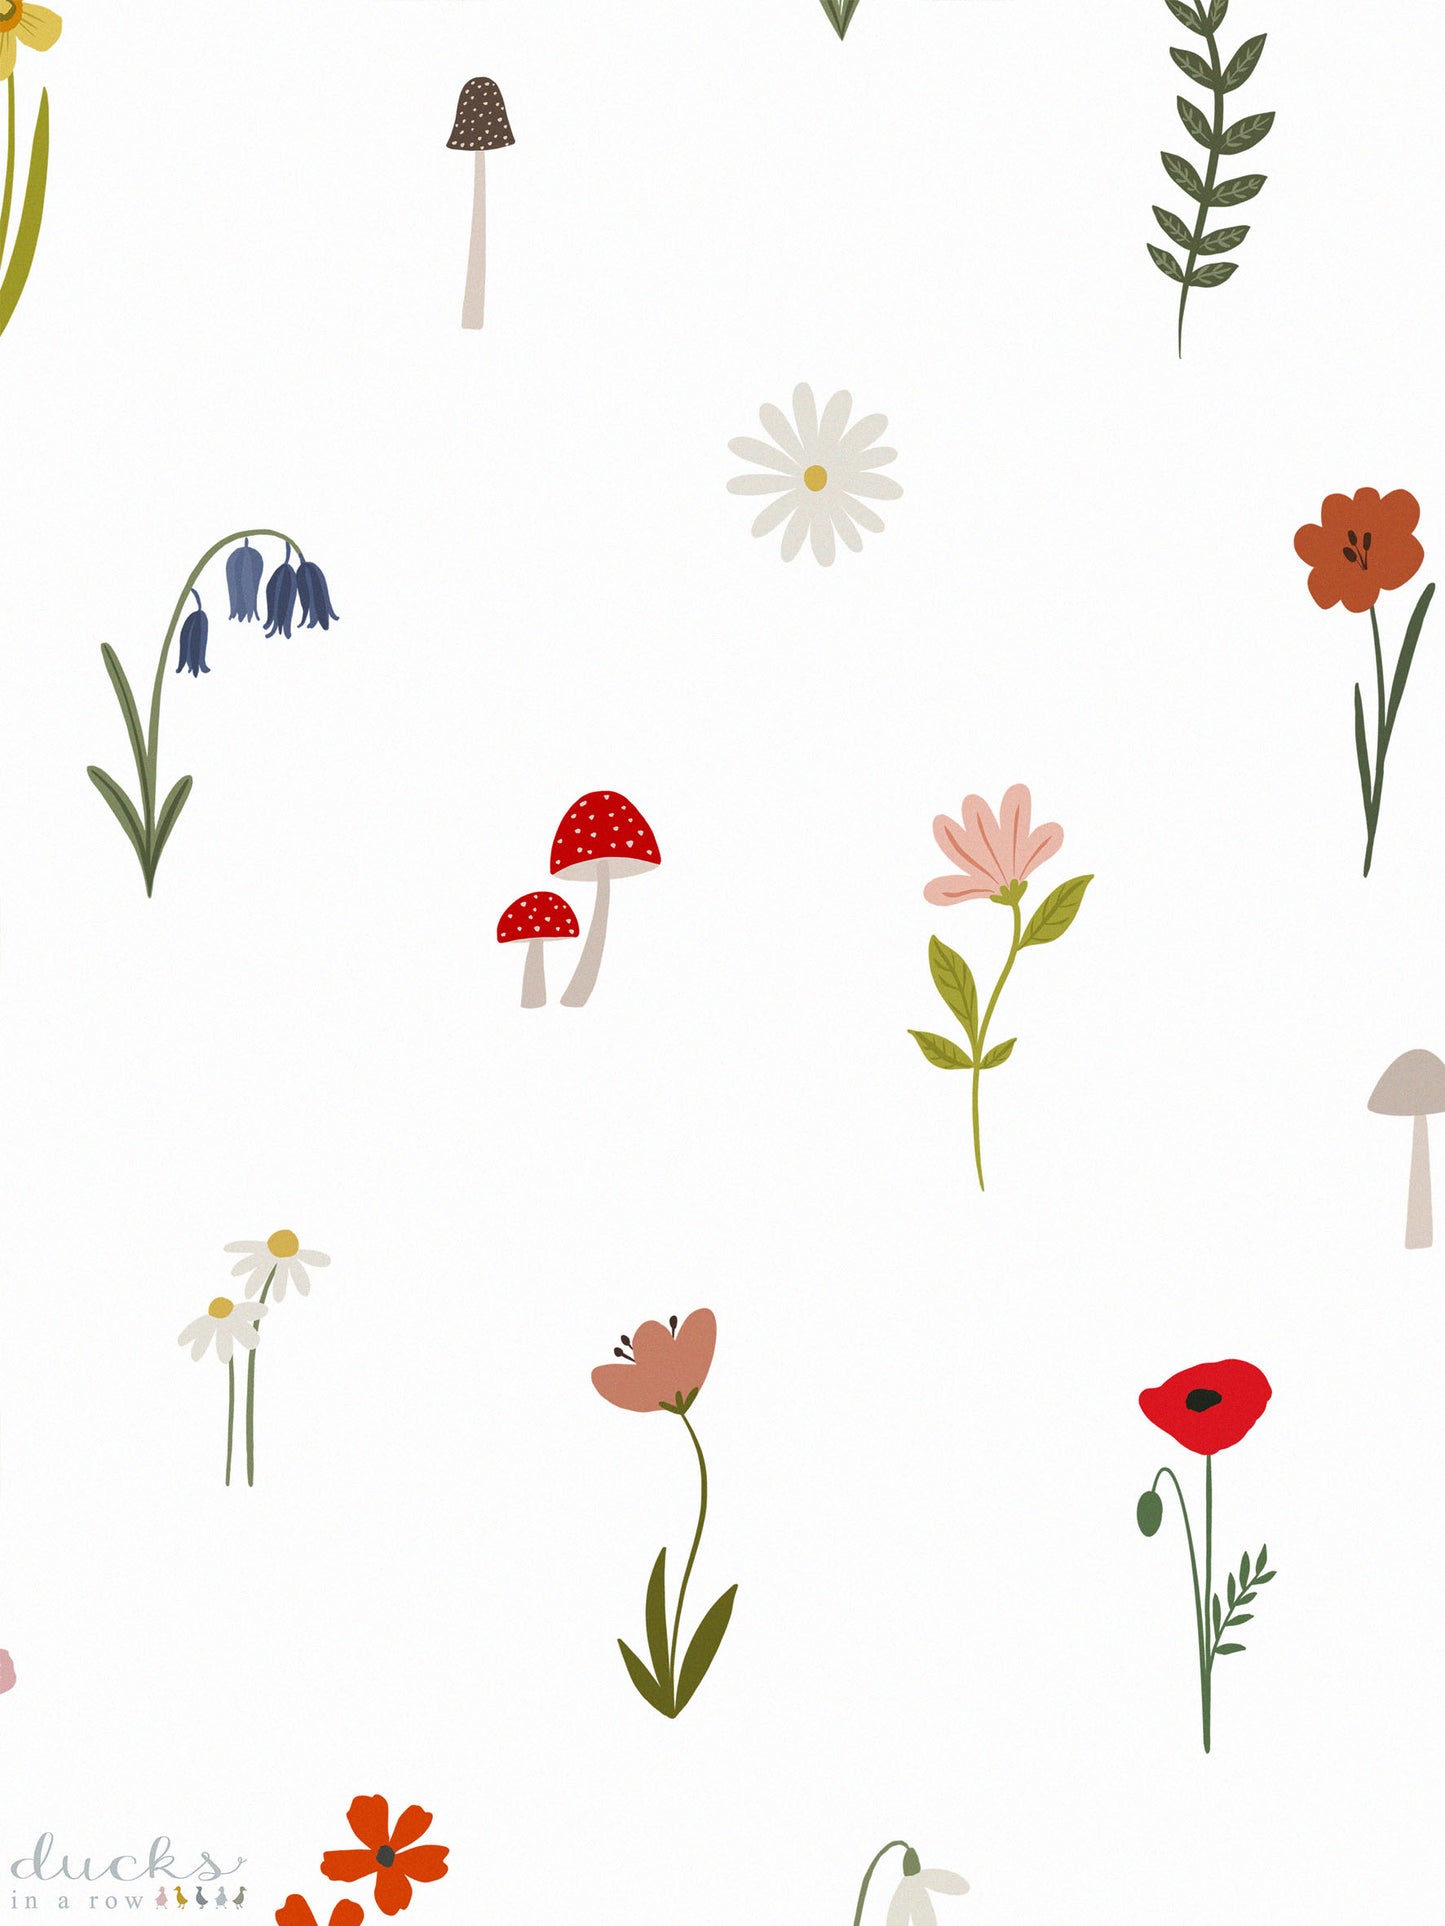 Forest Flower Luxury children's wallpaper design featuring whimsical flowers, daisies, bluebells, toadstools, poppys and more